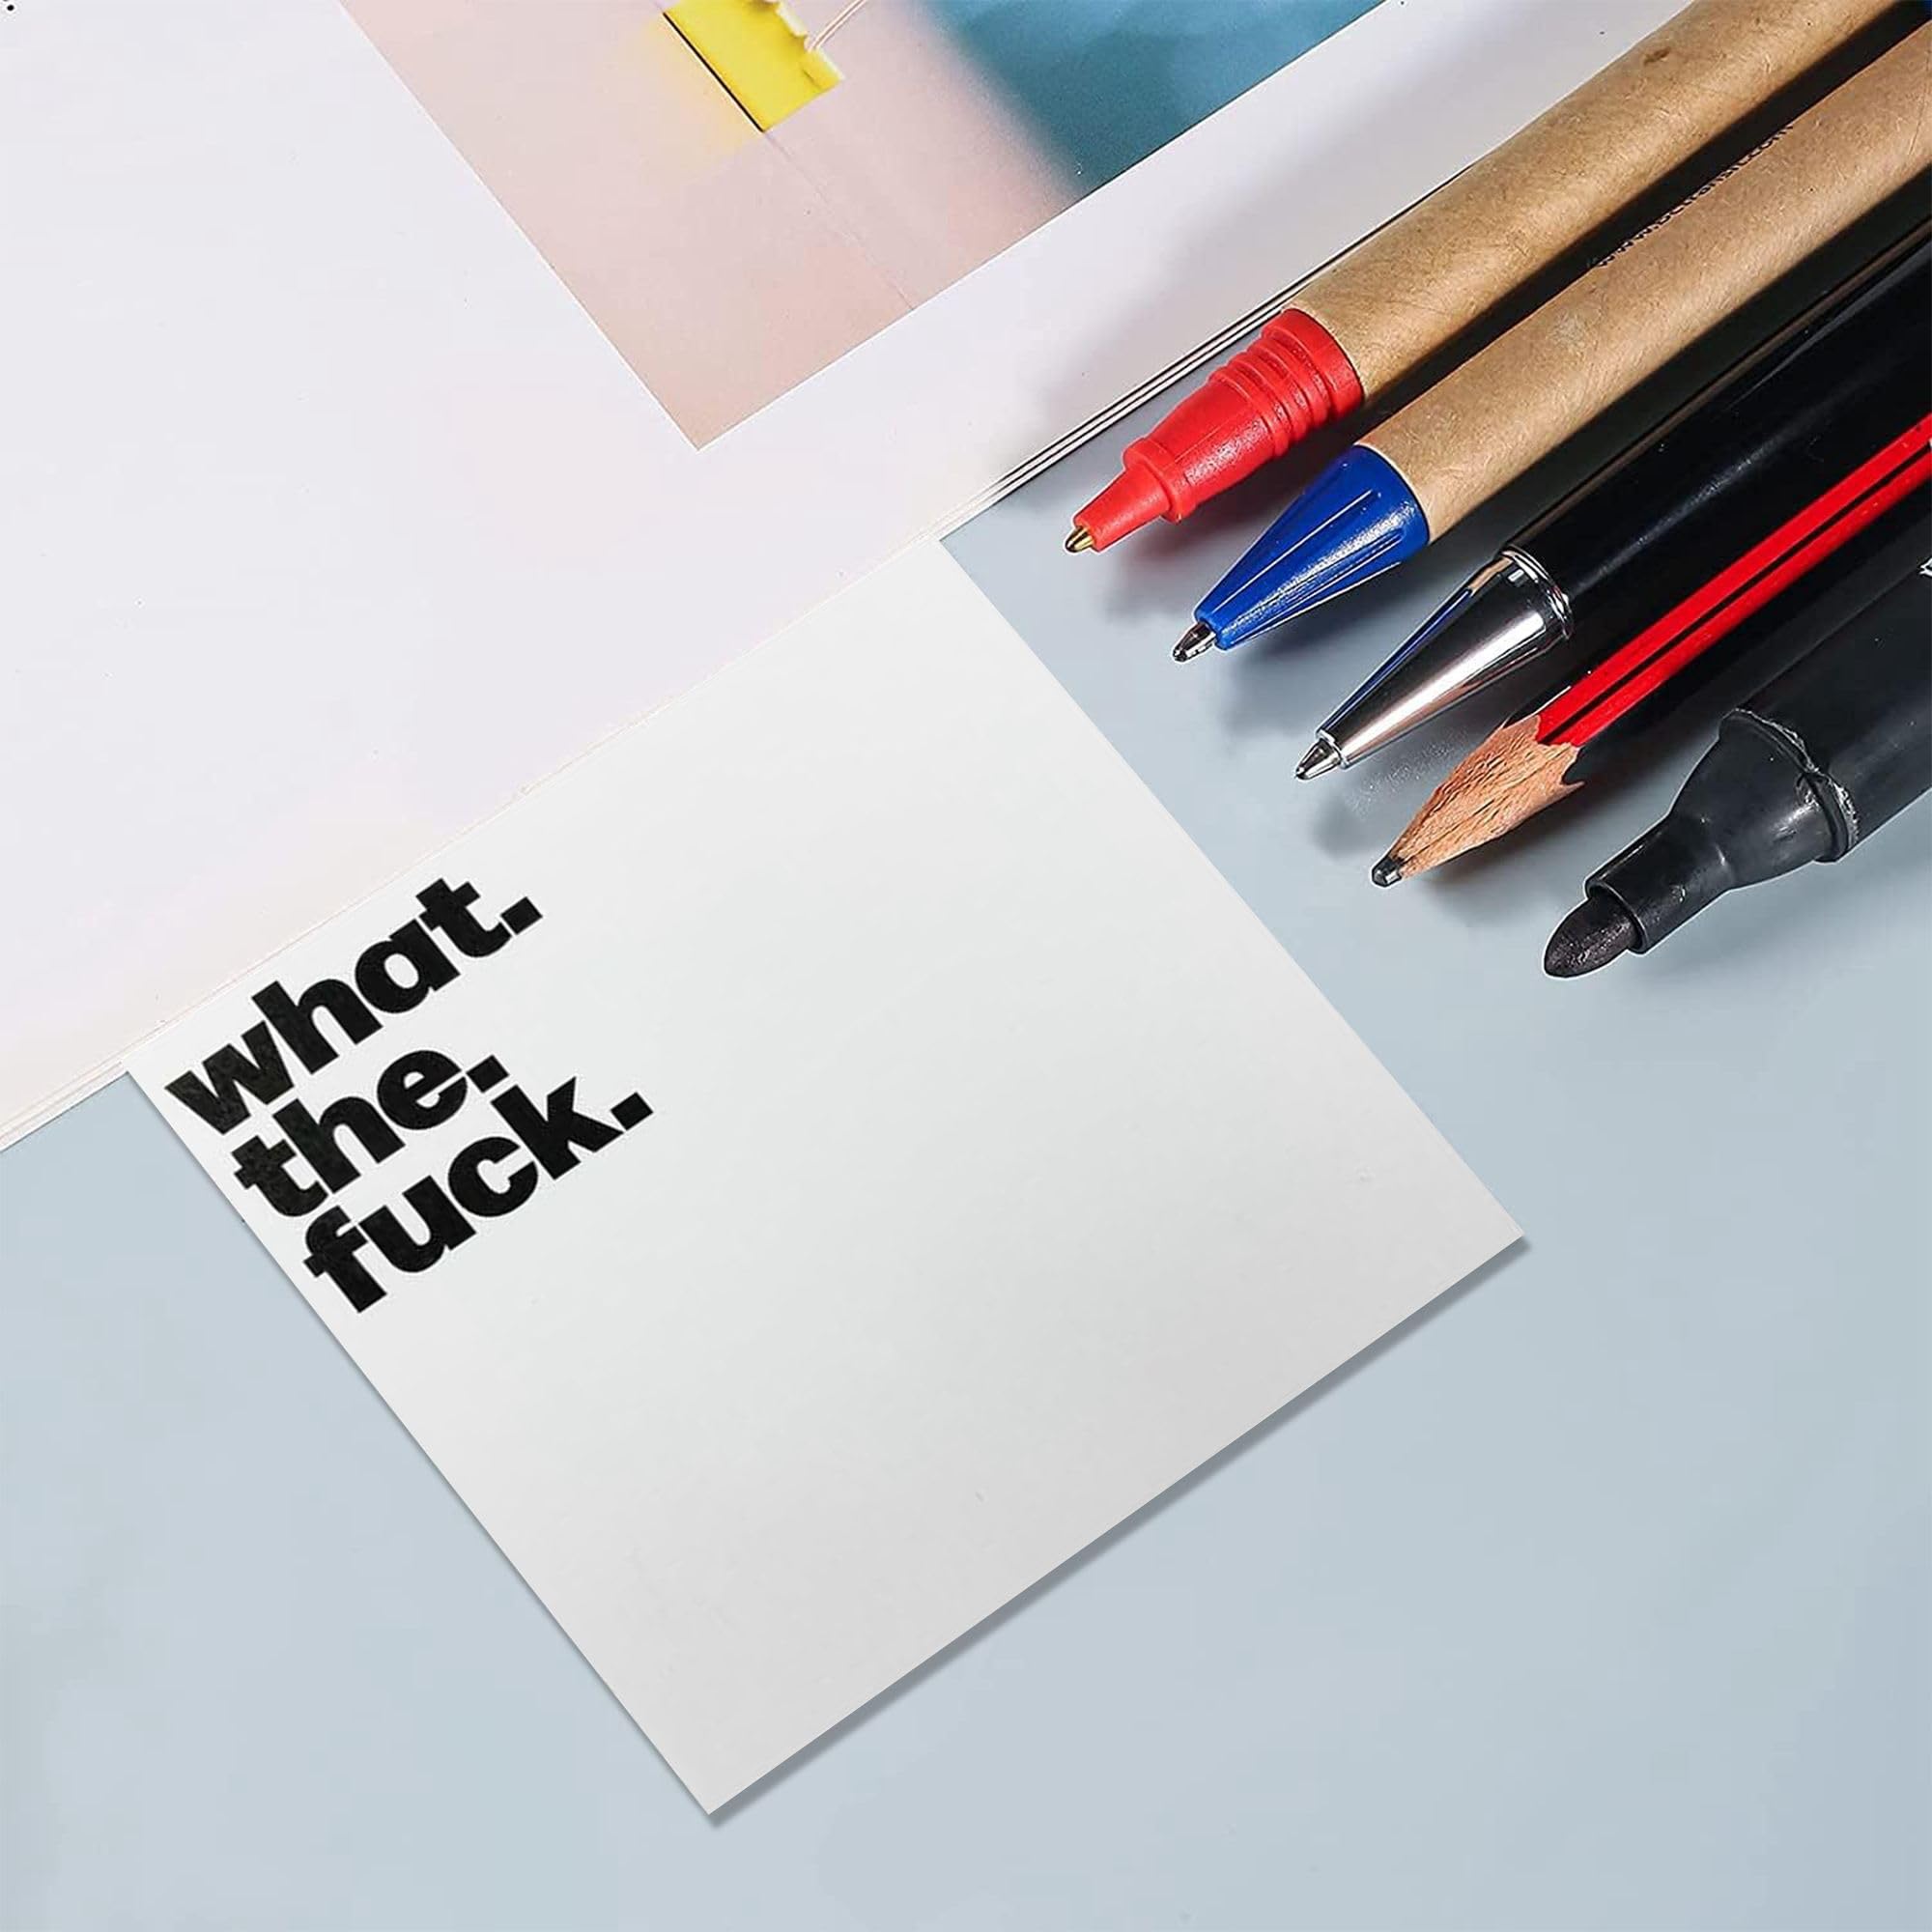 Small Sticky Notes, 3PCS Sticky Notes Set, What The Fuck Sticky Notes Novelty Office Supplies, Rude Posted Notes Desk Accessories Christmas Gifts, Funny Gifts for Friends Co-Workers Boss